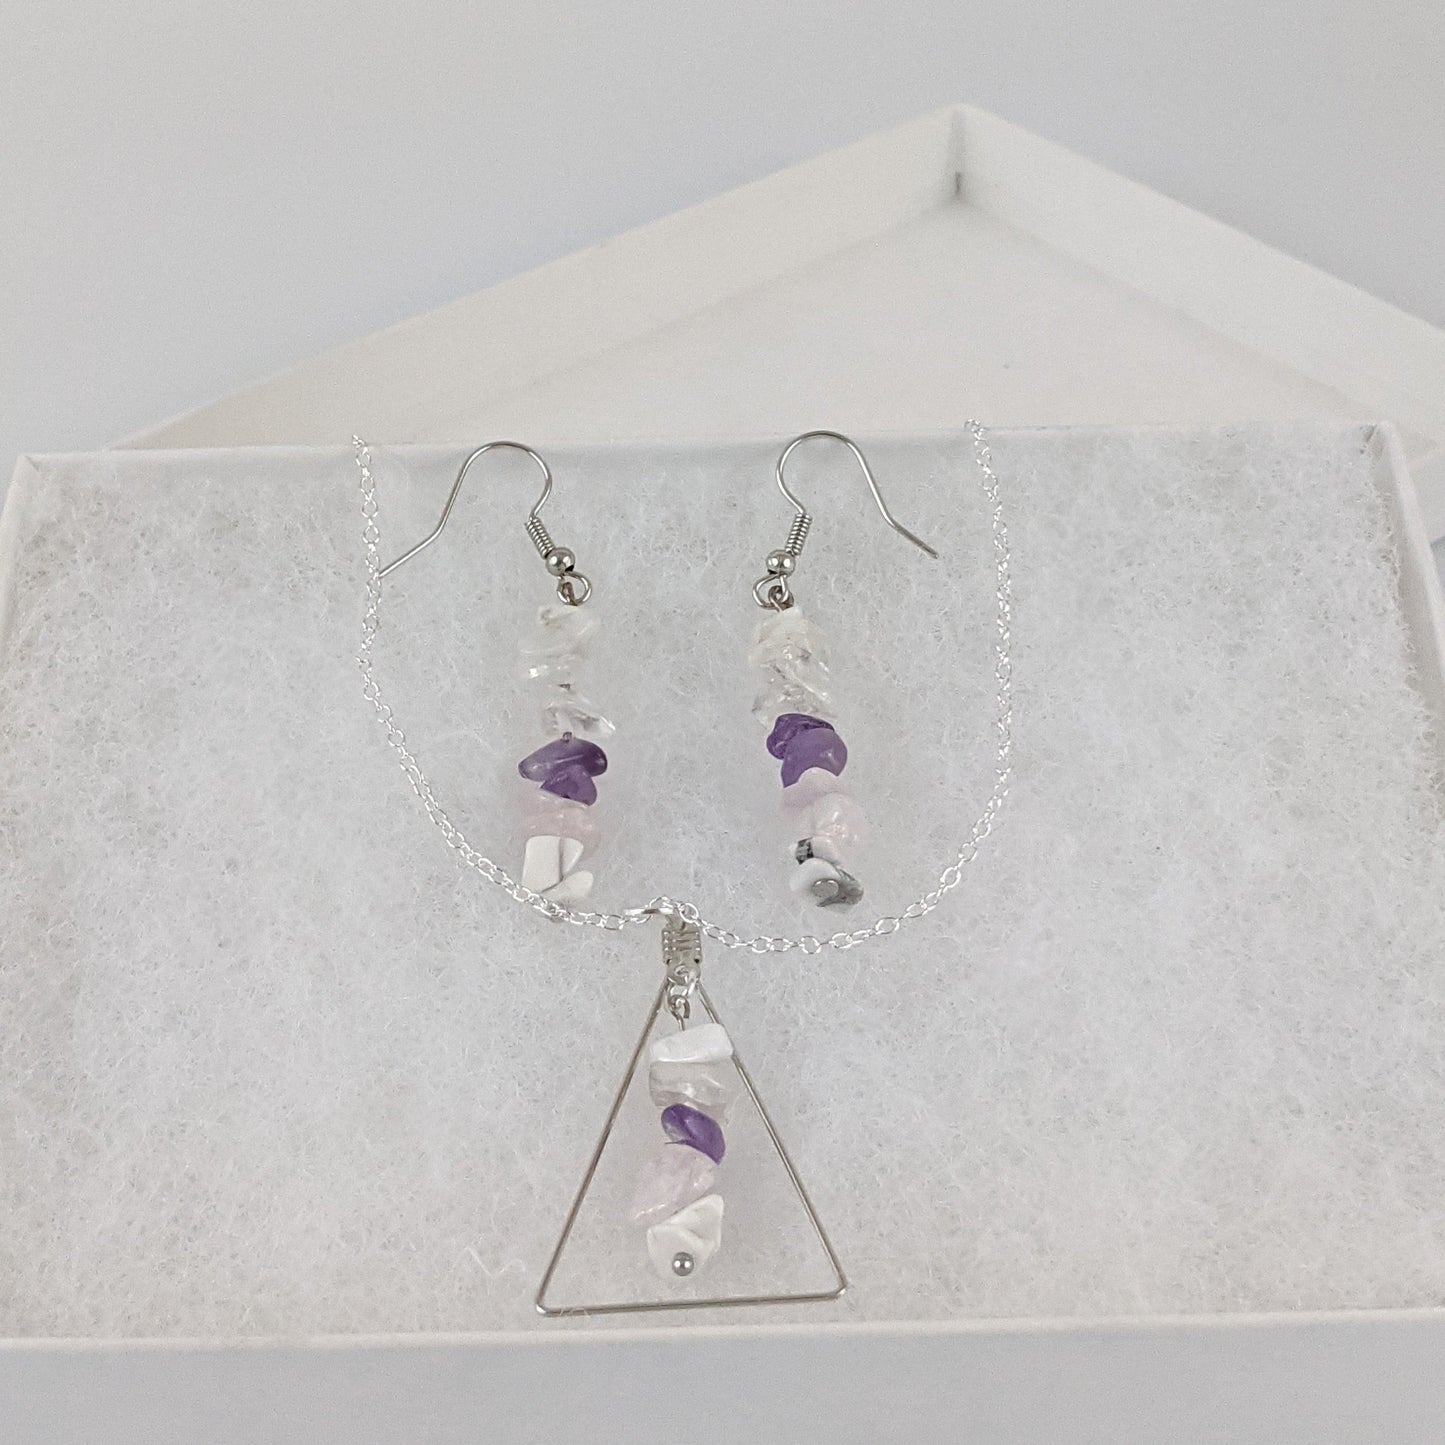 Good Vibes: Intention and Alignment Triangle Pendant and Dangle Earrings Set